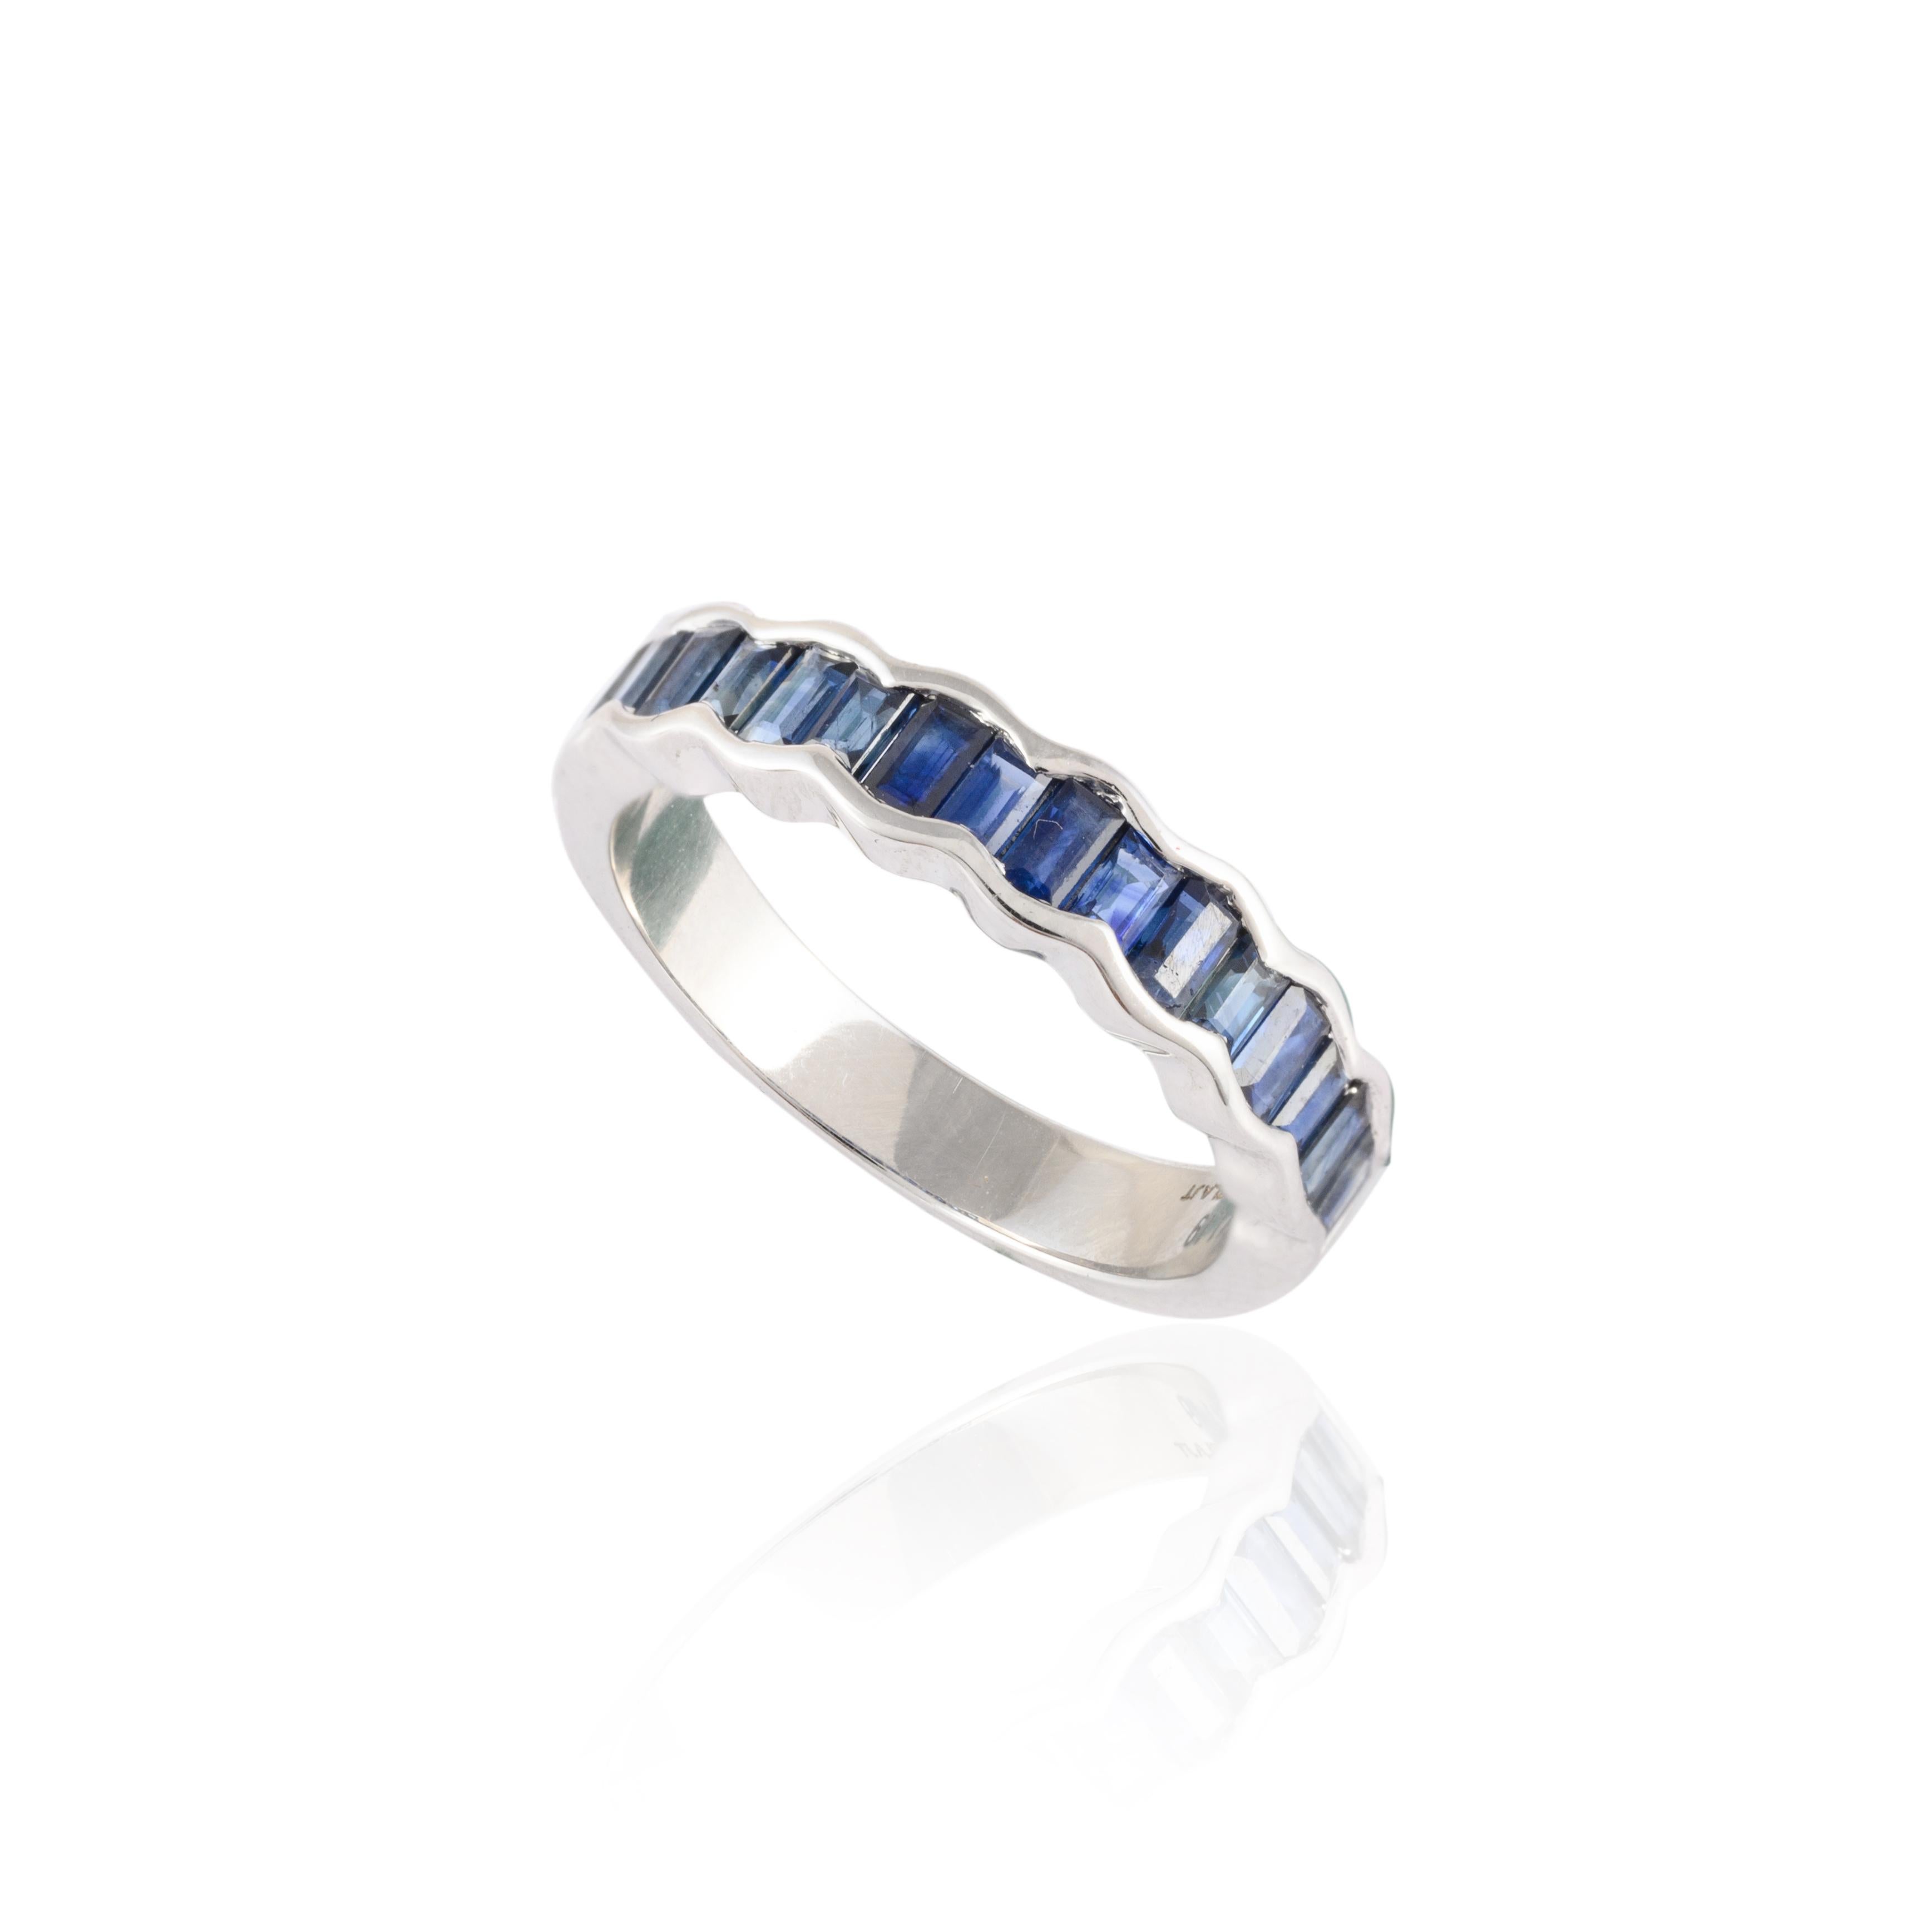 For Sale:  Elegant Stackable Blue Sapphire Gemstone Band Ring in 18k Solid White Gold 8